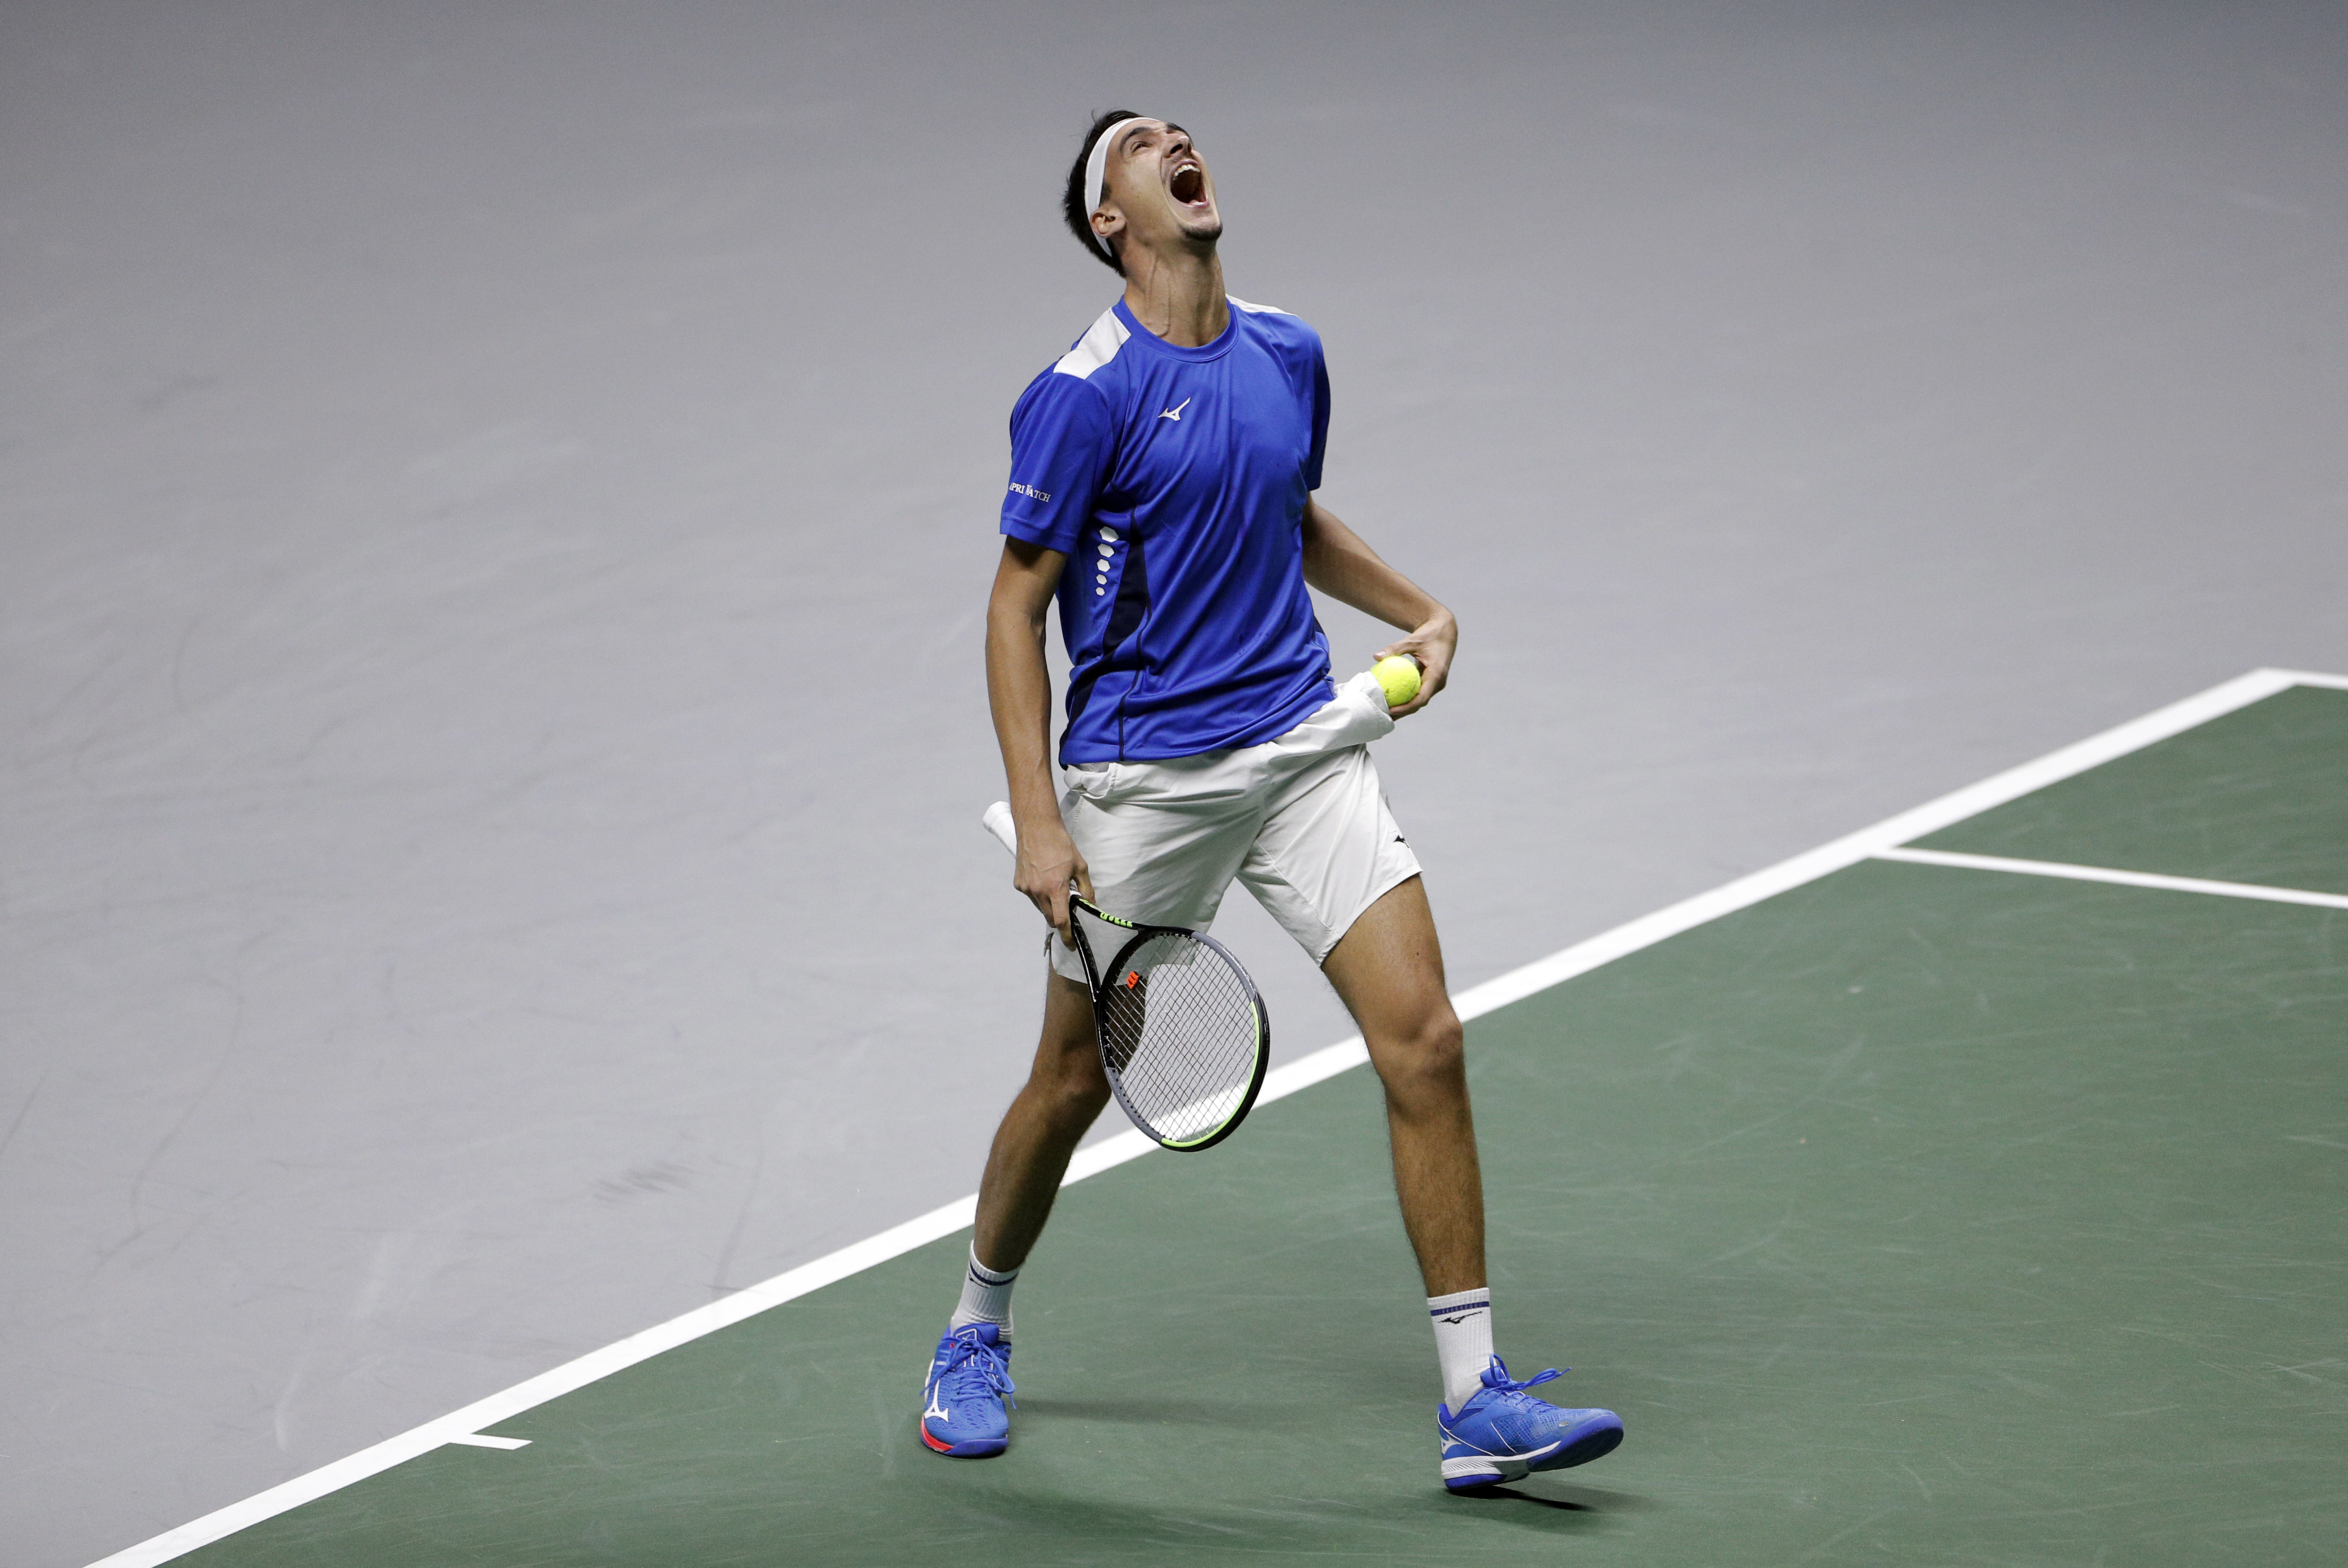 Tennis - Davis Cup Finals - Group F - Italy v Colombia - Pala Alpitour, Turin, Italy - November 27, 2021 Italy's Lorenzo Sonego celebrates winning his match against Colombia's Nicolas Mejia REUTERS/Guglielmo Mangiapane